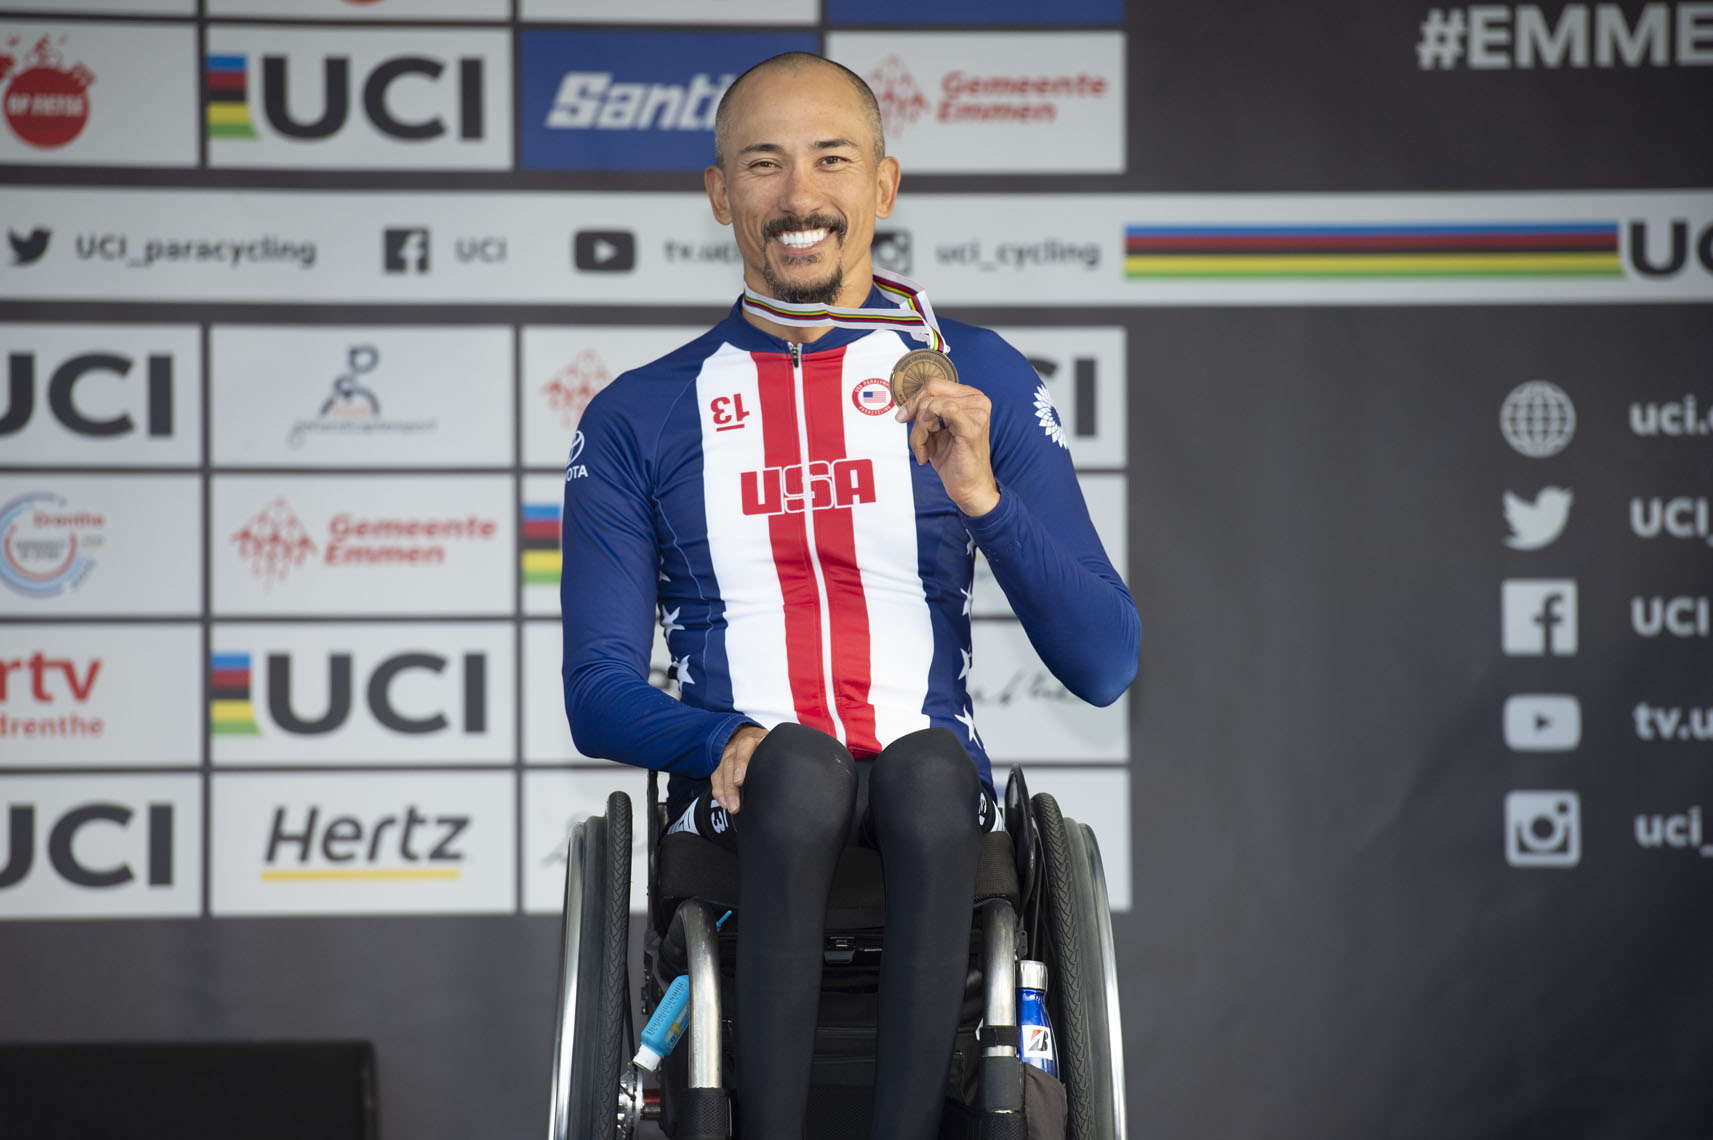 Will Groulx, 2019 Paracycling Road World Championships